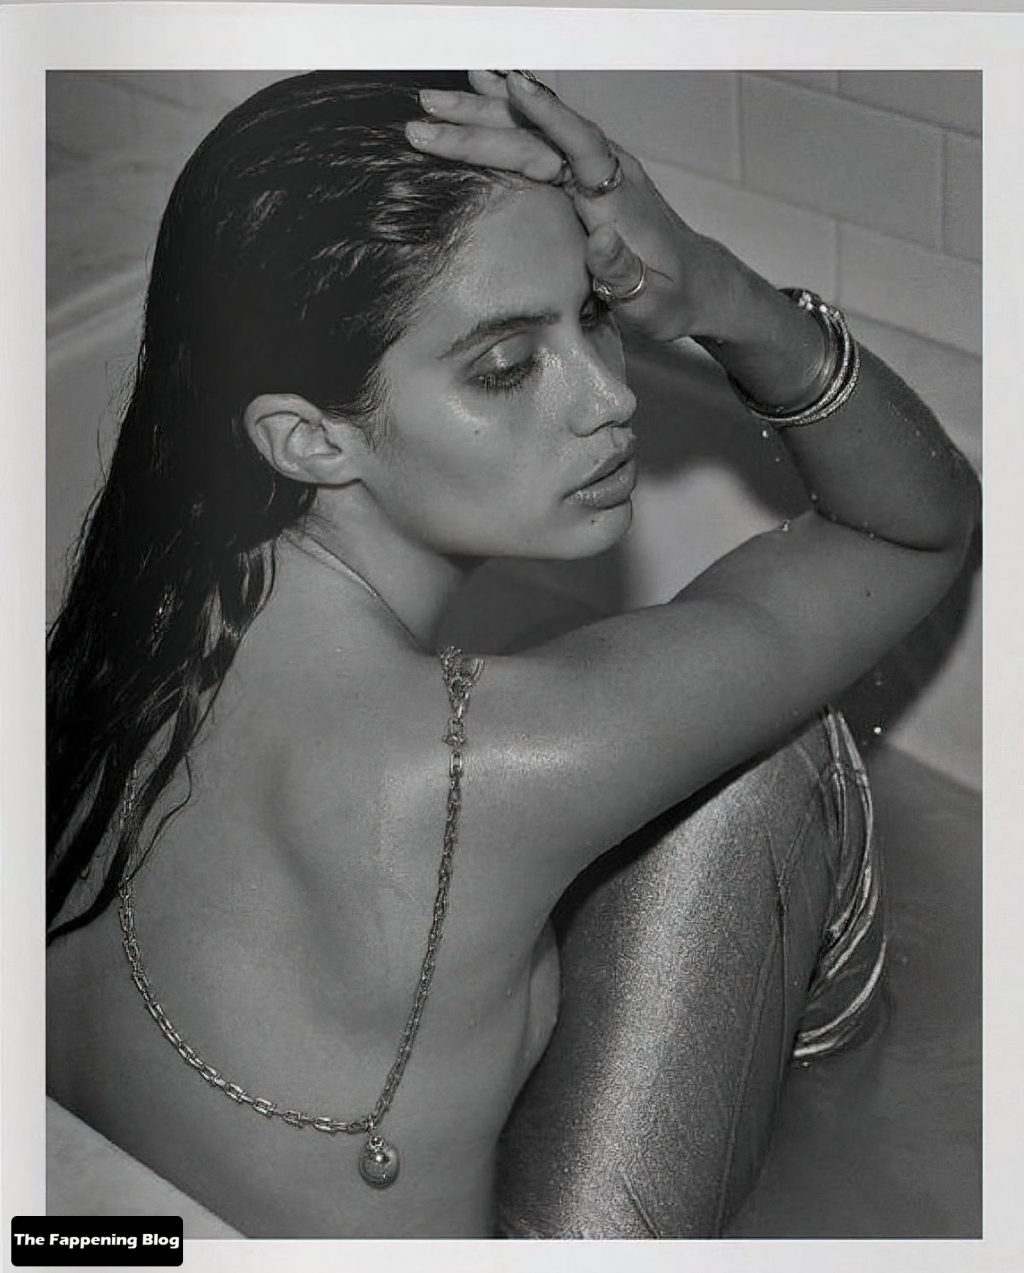 Sara Sampaio Displays Her Stunning Figure in a Topless Shoot for M Magazine Issue #6 (12 Photos)